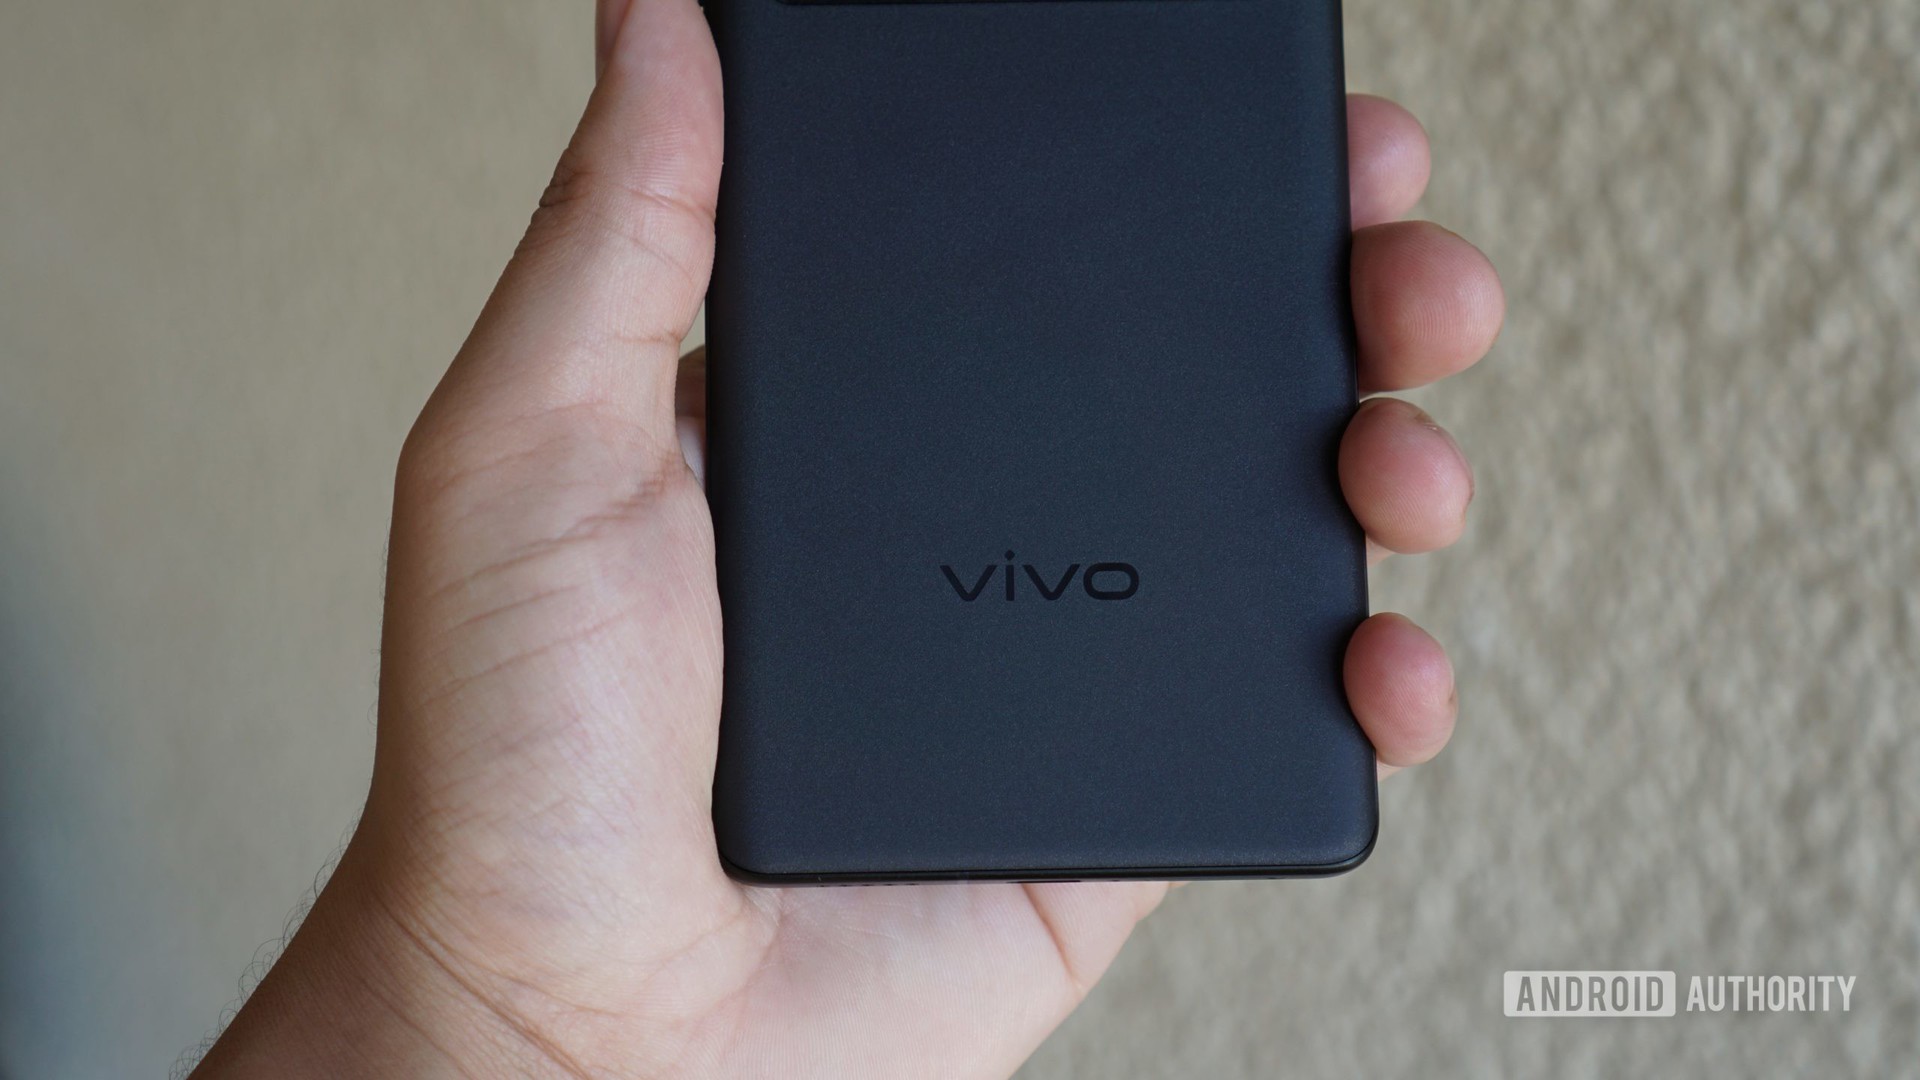 The Vivo logo on the X70 Pro Plus in hand.